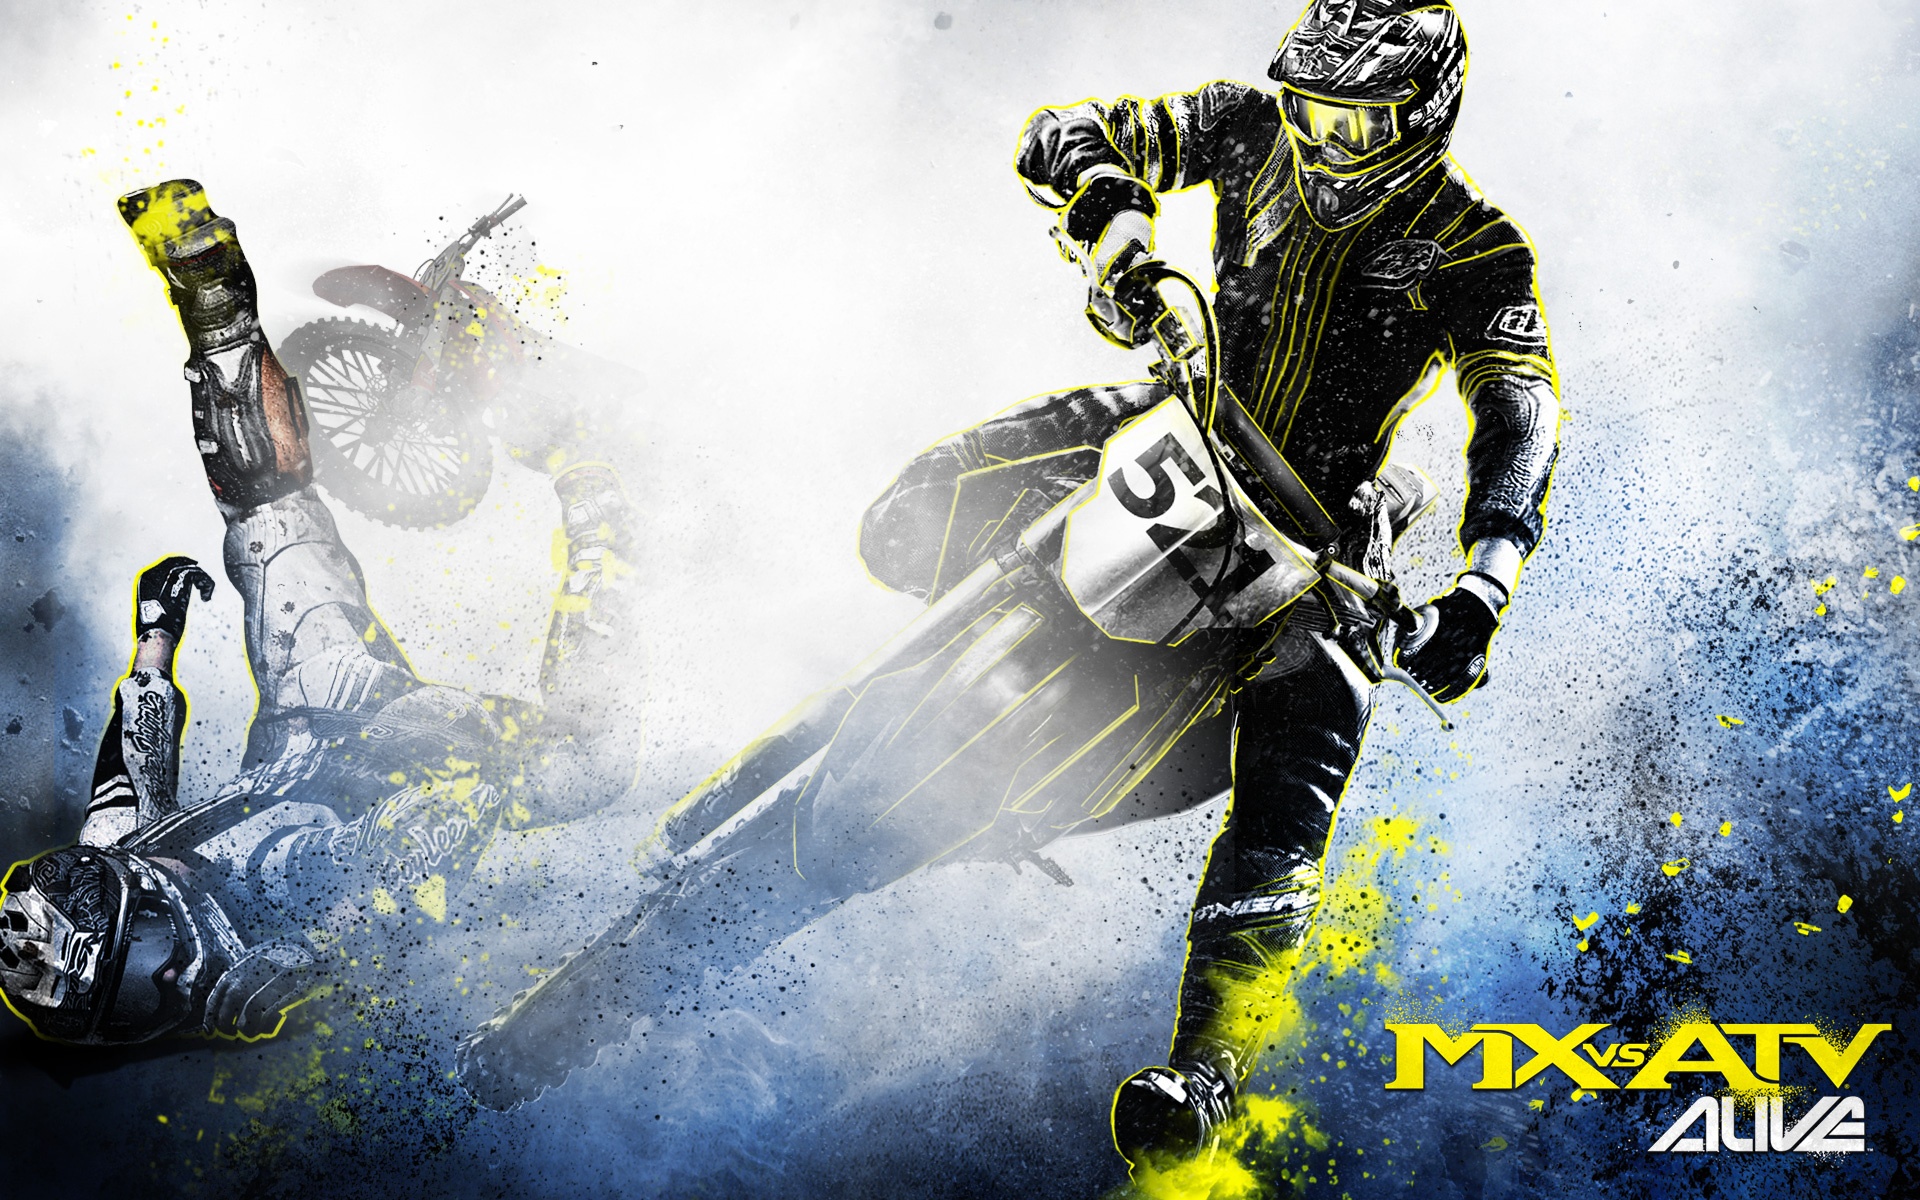 Mx Vs Atv Alive wallpapers for desktop, download free Mx Vs Atv Alive  pictures and backgrounds for PC 